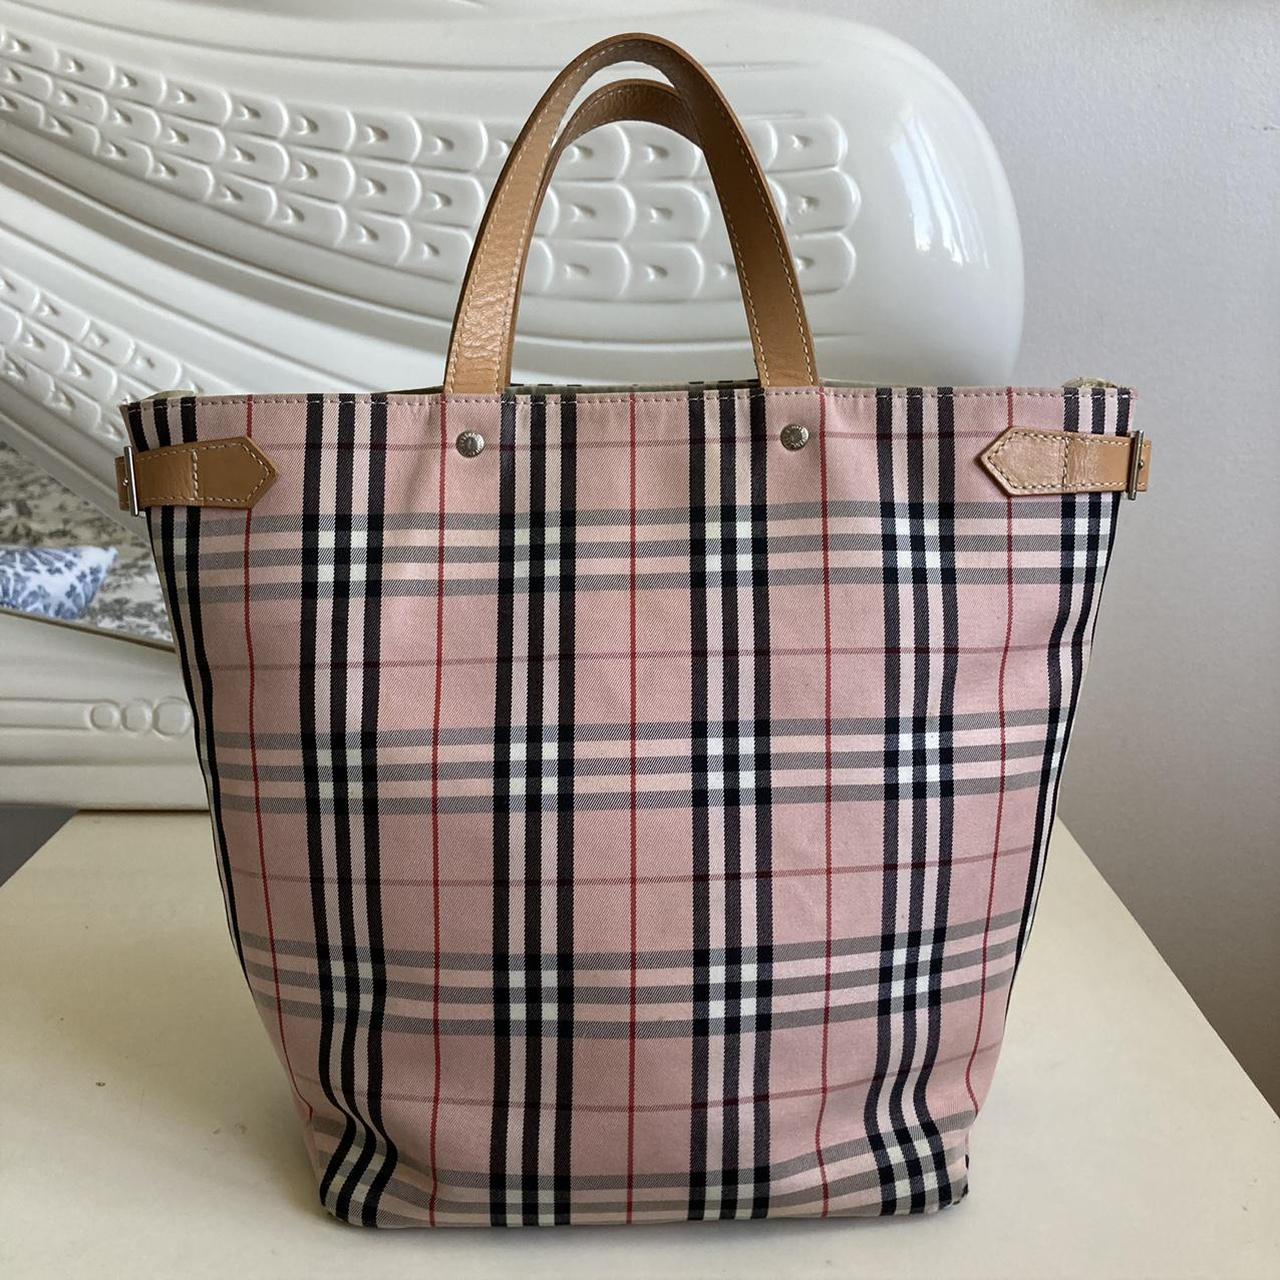 AUTHENTIC PINK BURBERRY TOTE BAG, Can you say